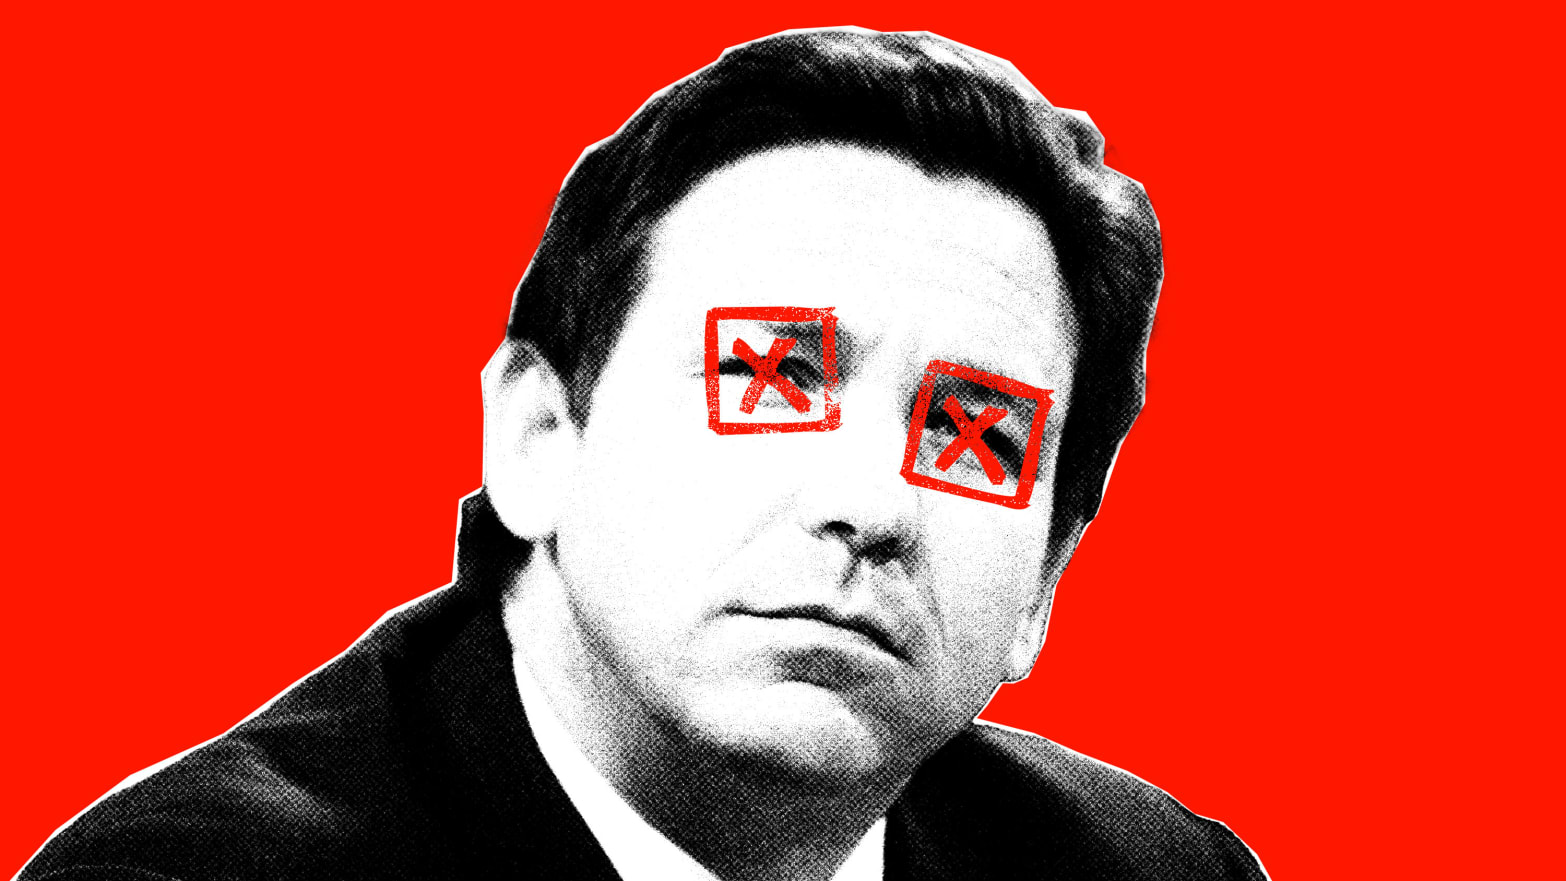 Photo illustration of Ron DeSantis with xs over his eyes on a red background